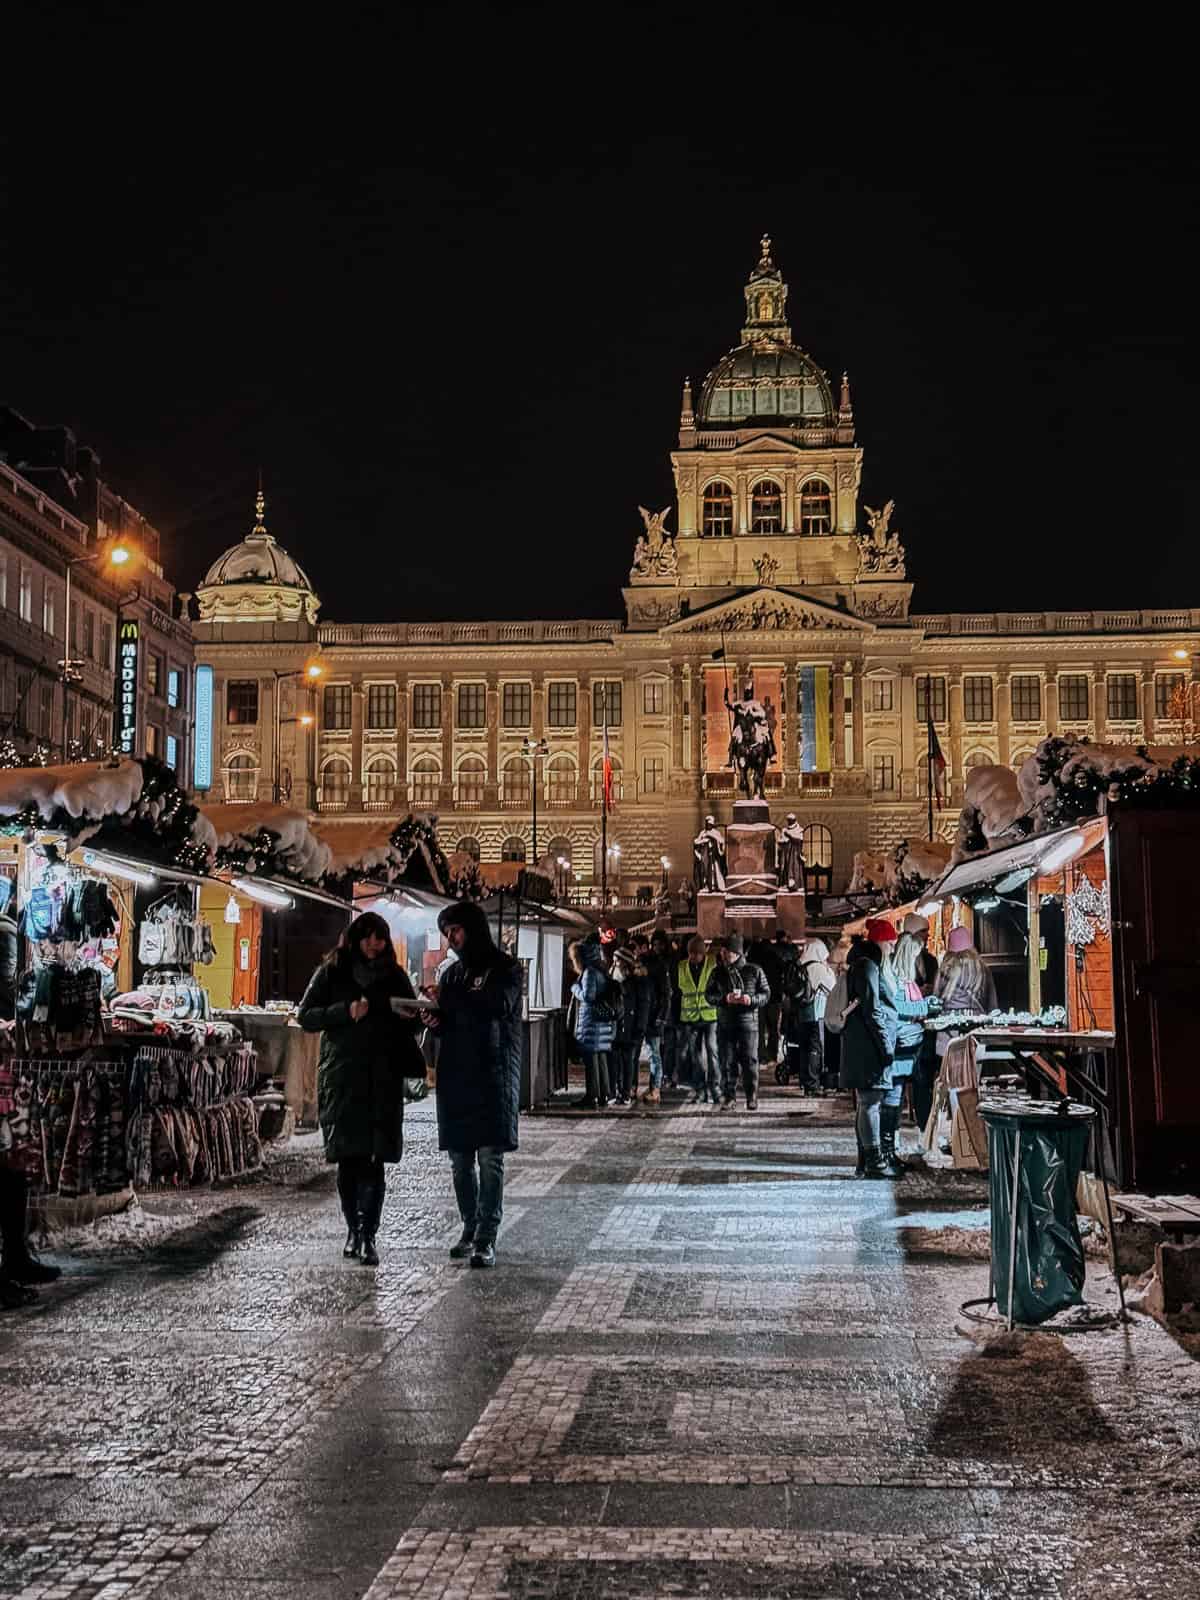 The Christmas market in front of the national musuem in Prague lit up at night with wooden market stalls